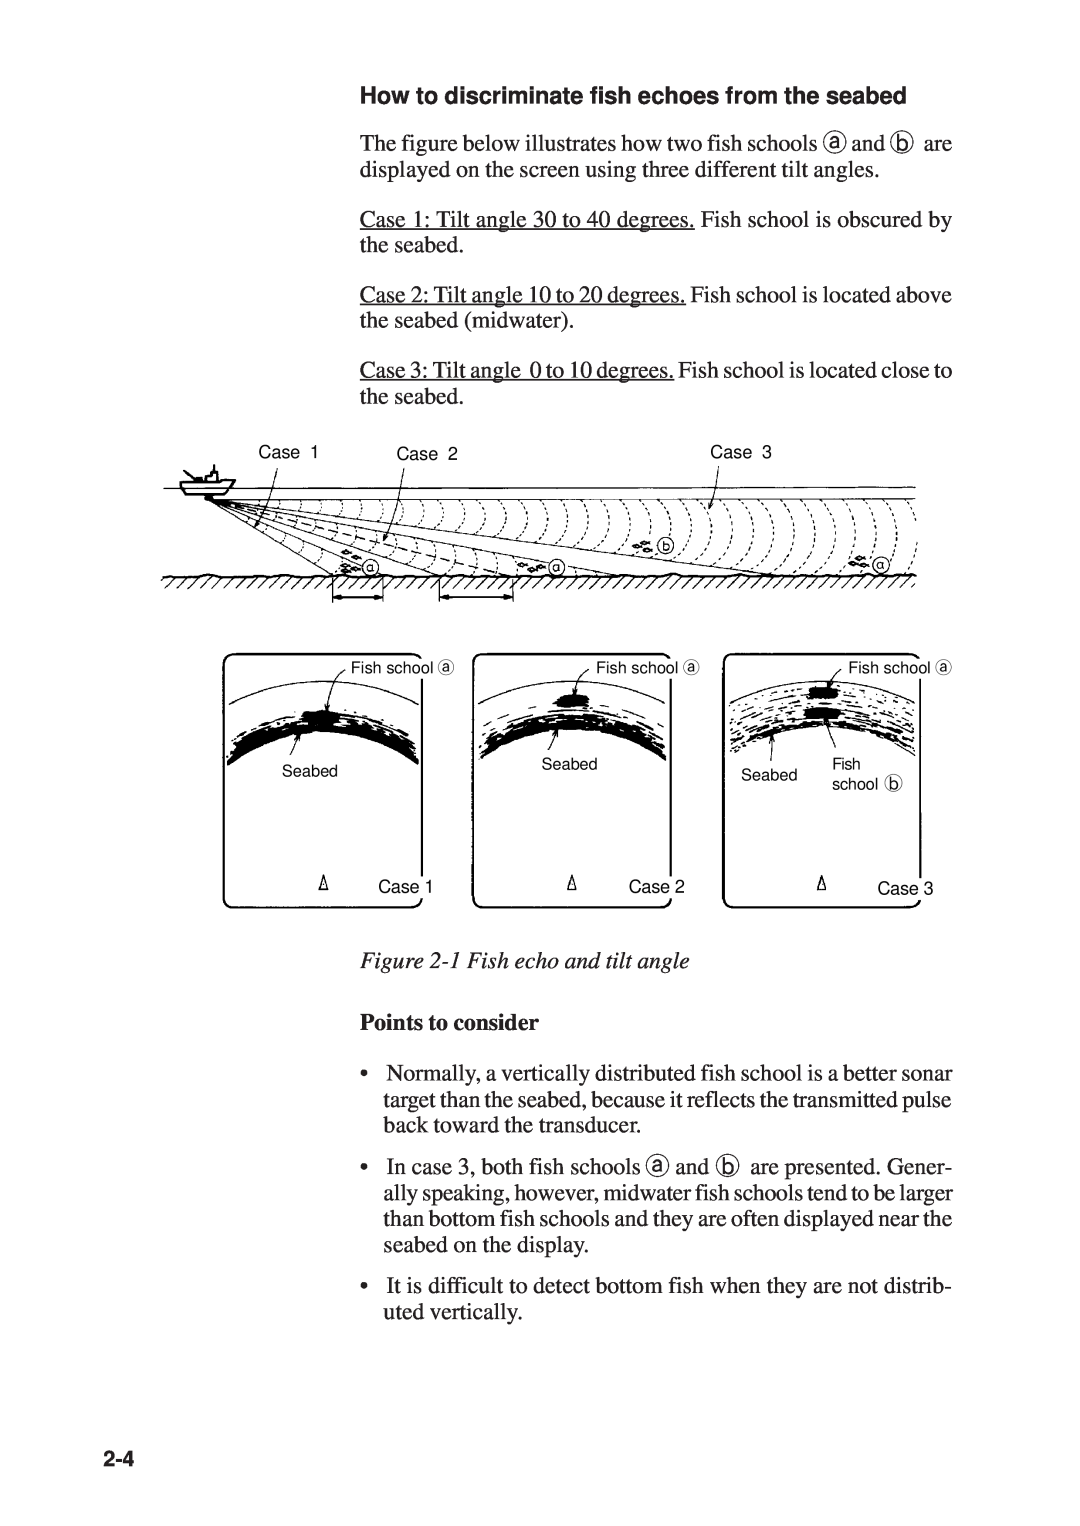 Furuno CSH-53 manual How to discriminate fish echoes from the seabed, 1 Fish echo and tilt angle, Points to consider 